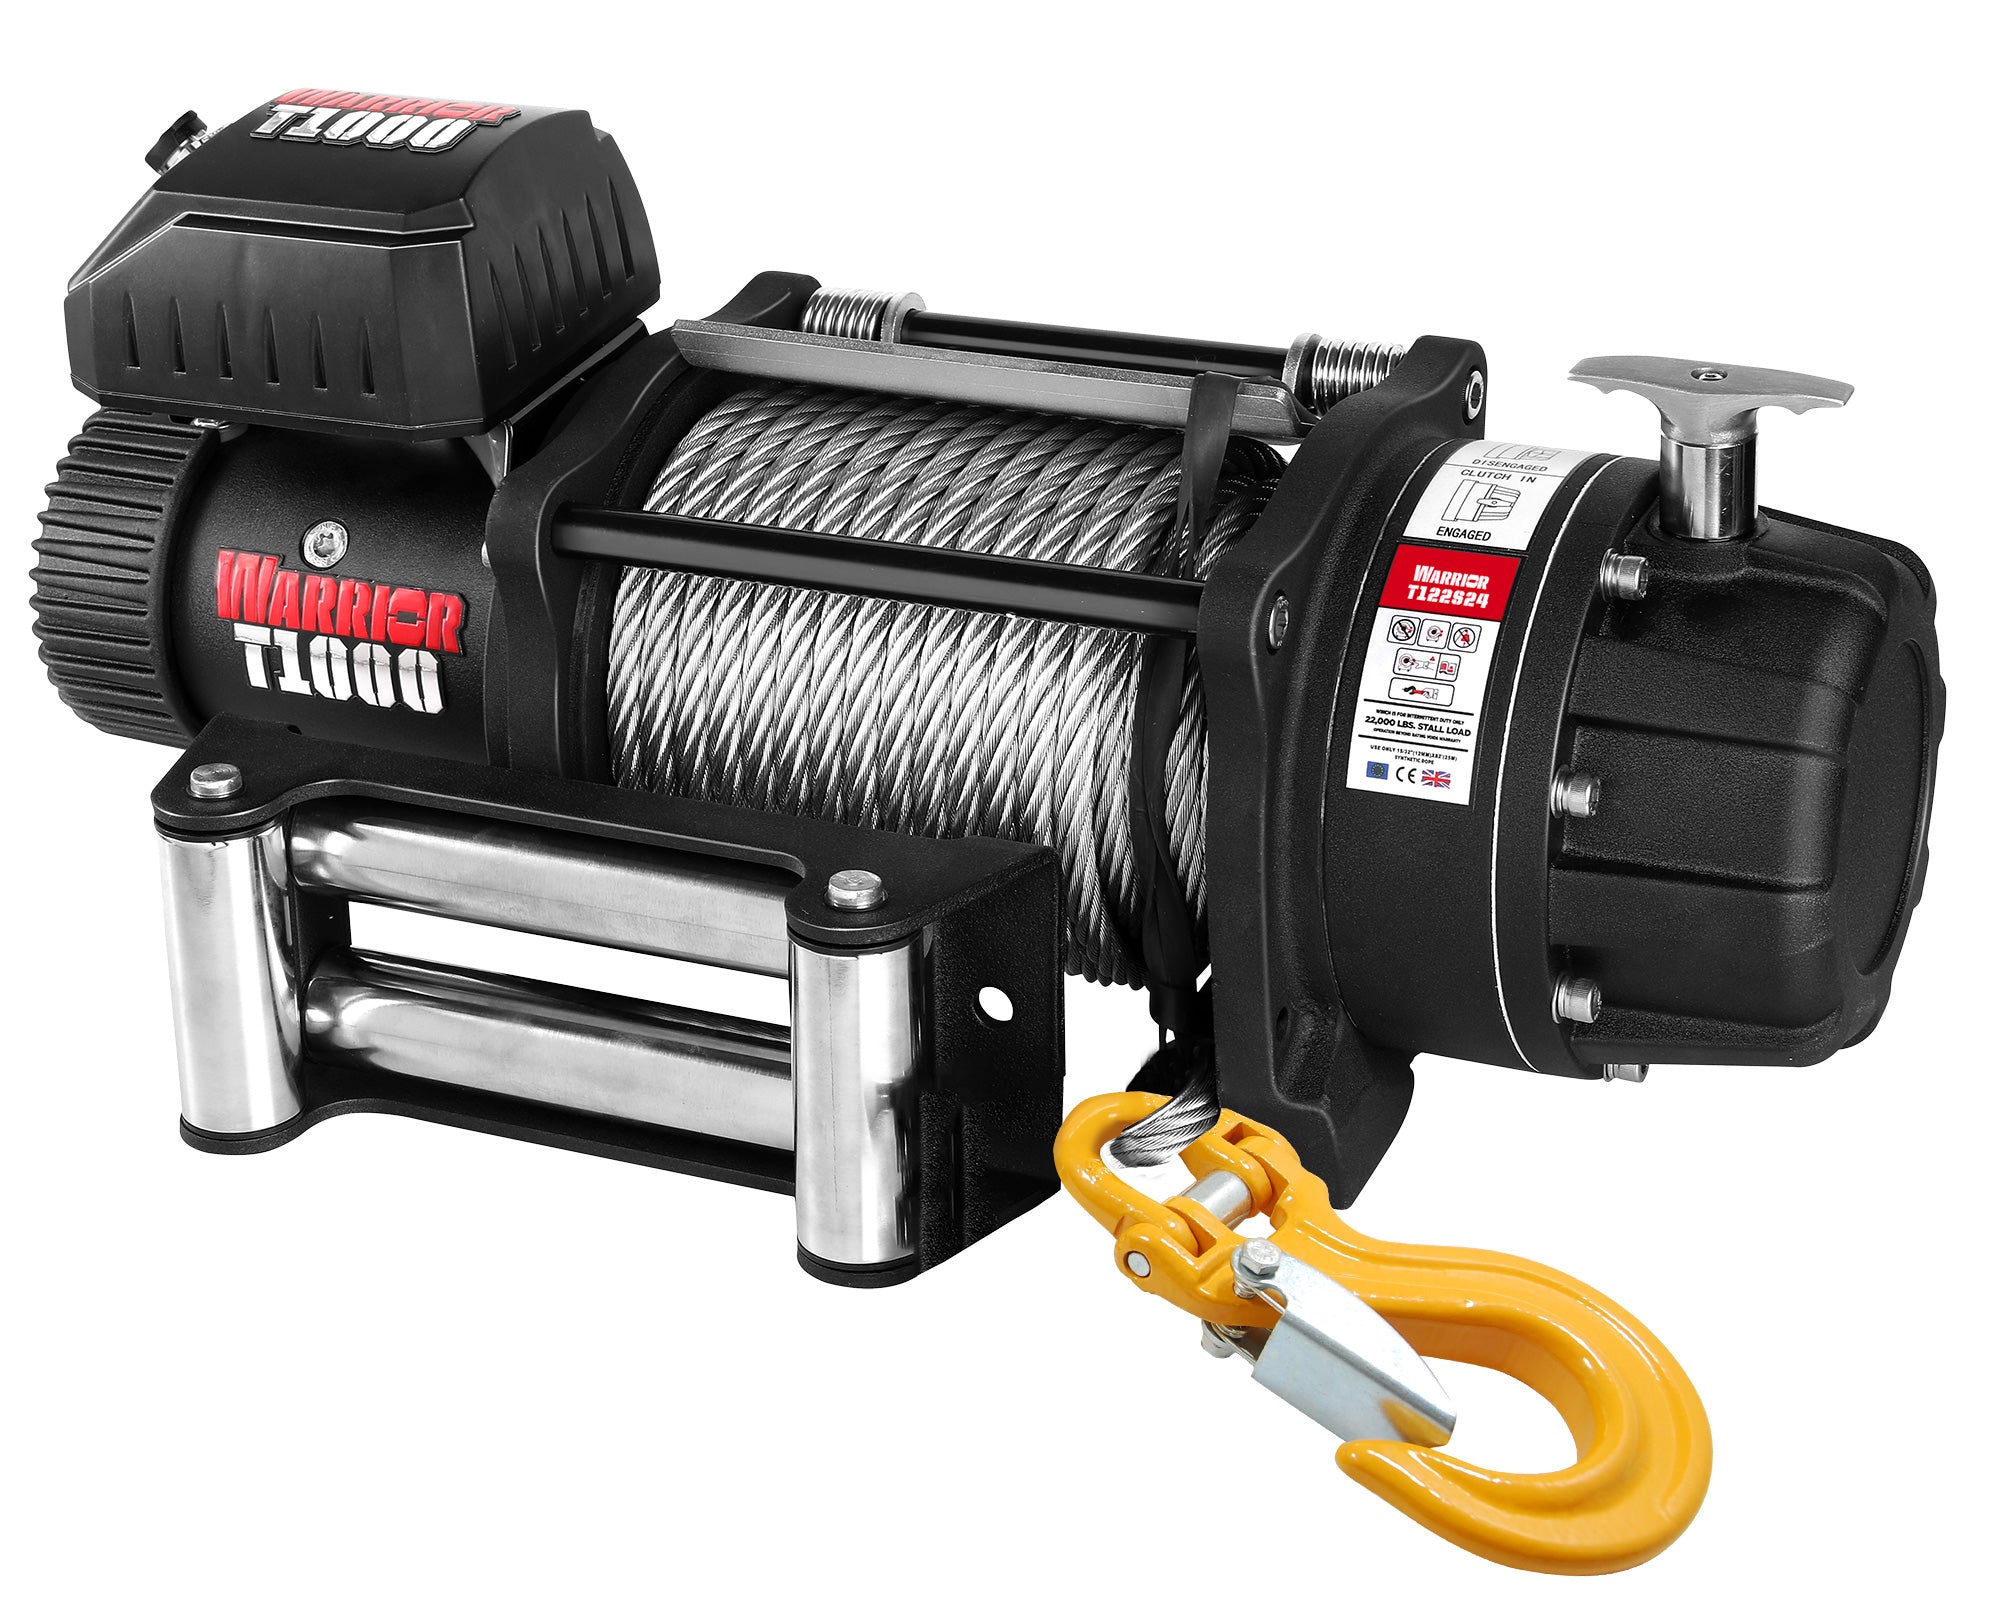 YATOINTO Portable Drill Winch of 750 LB Pulling Capacity with 40 Feet Alloy  Steel Wire Rope, Hand Winch for Lifting & Dragging